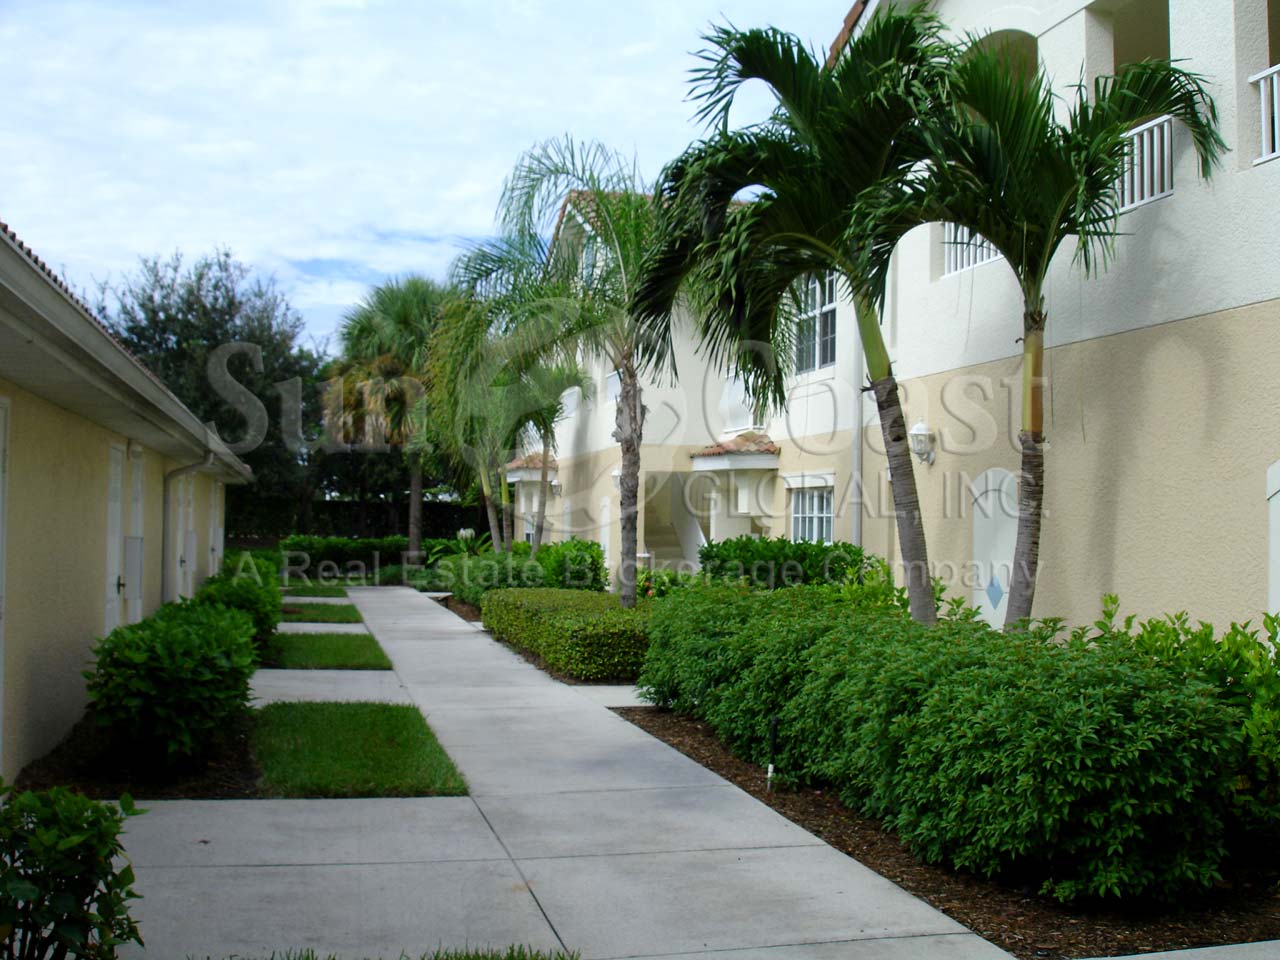 Treasure Bay Walkway from the Condominiums to the Detached Garages